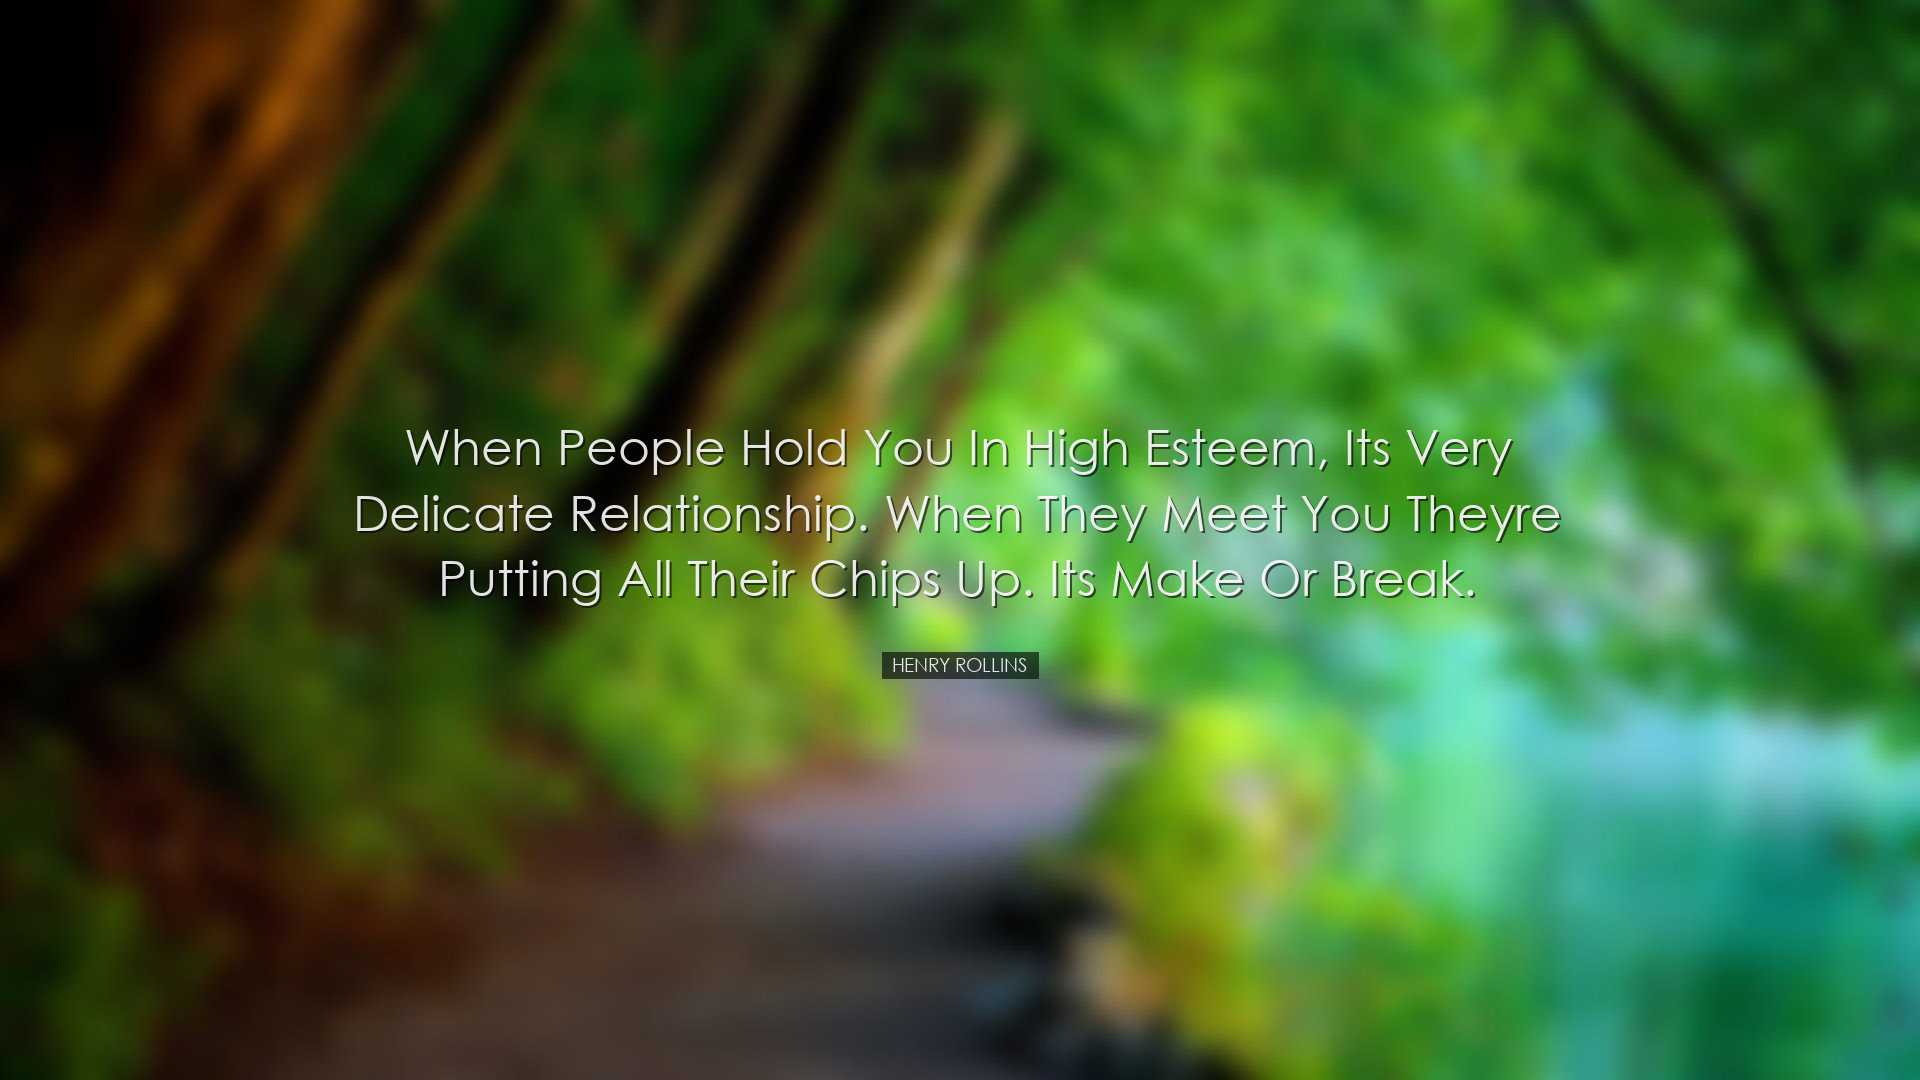 When people hold you in high esteem, its very delicate relationshi